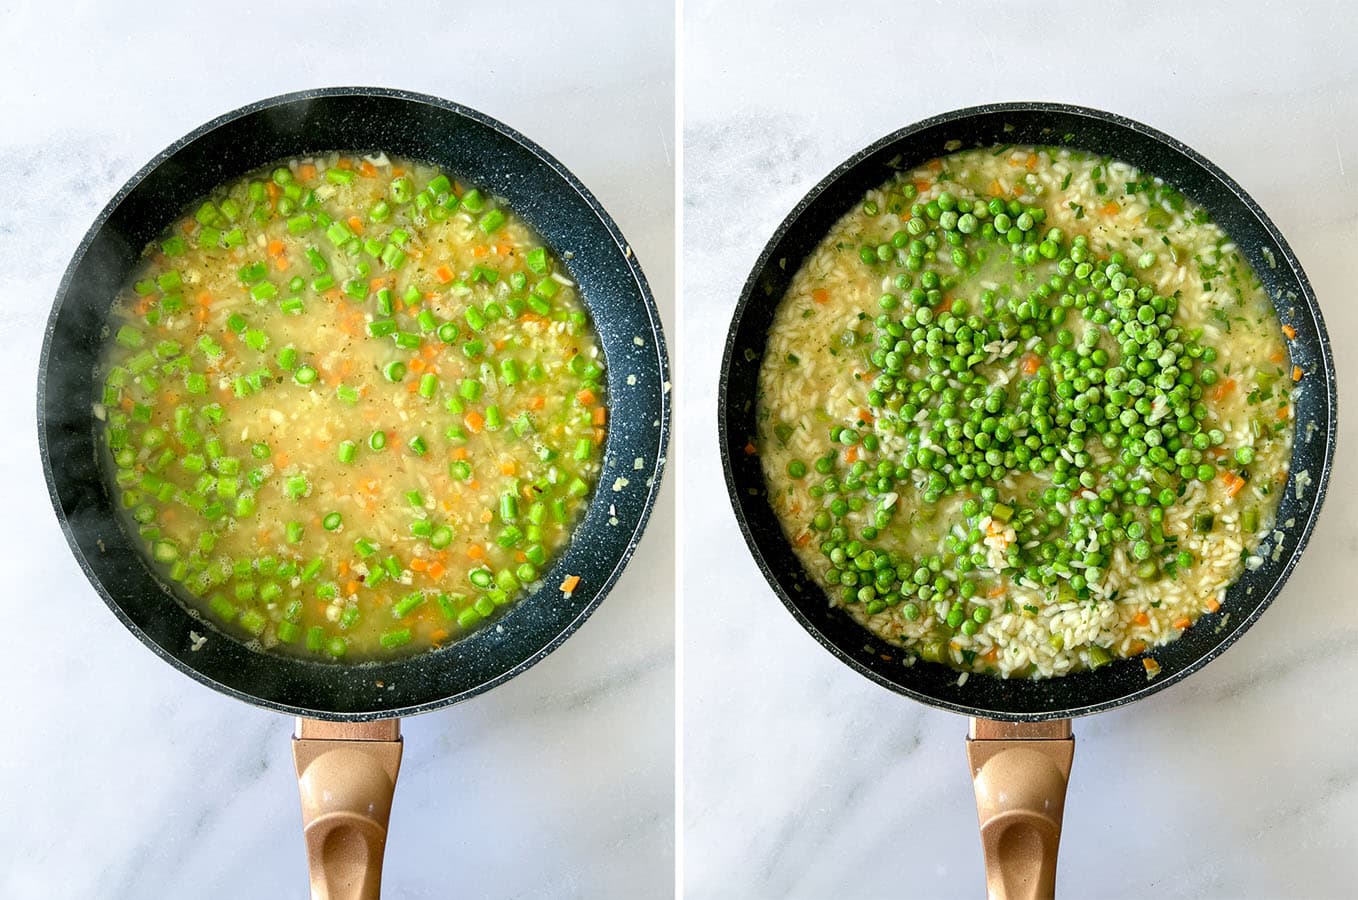 How to make Vegan Asparagus Risotto